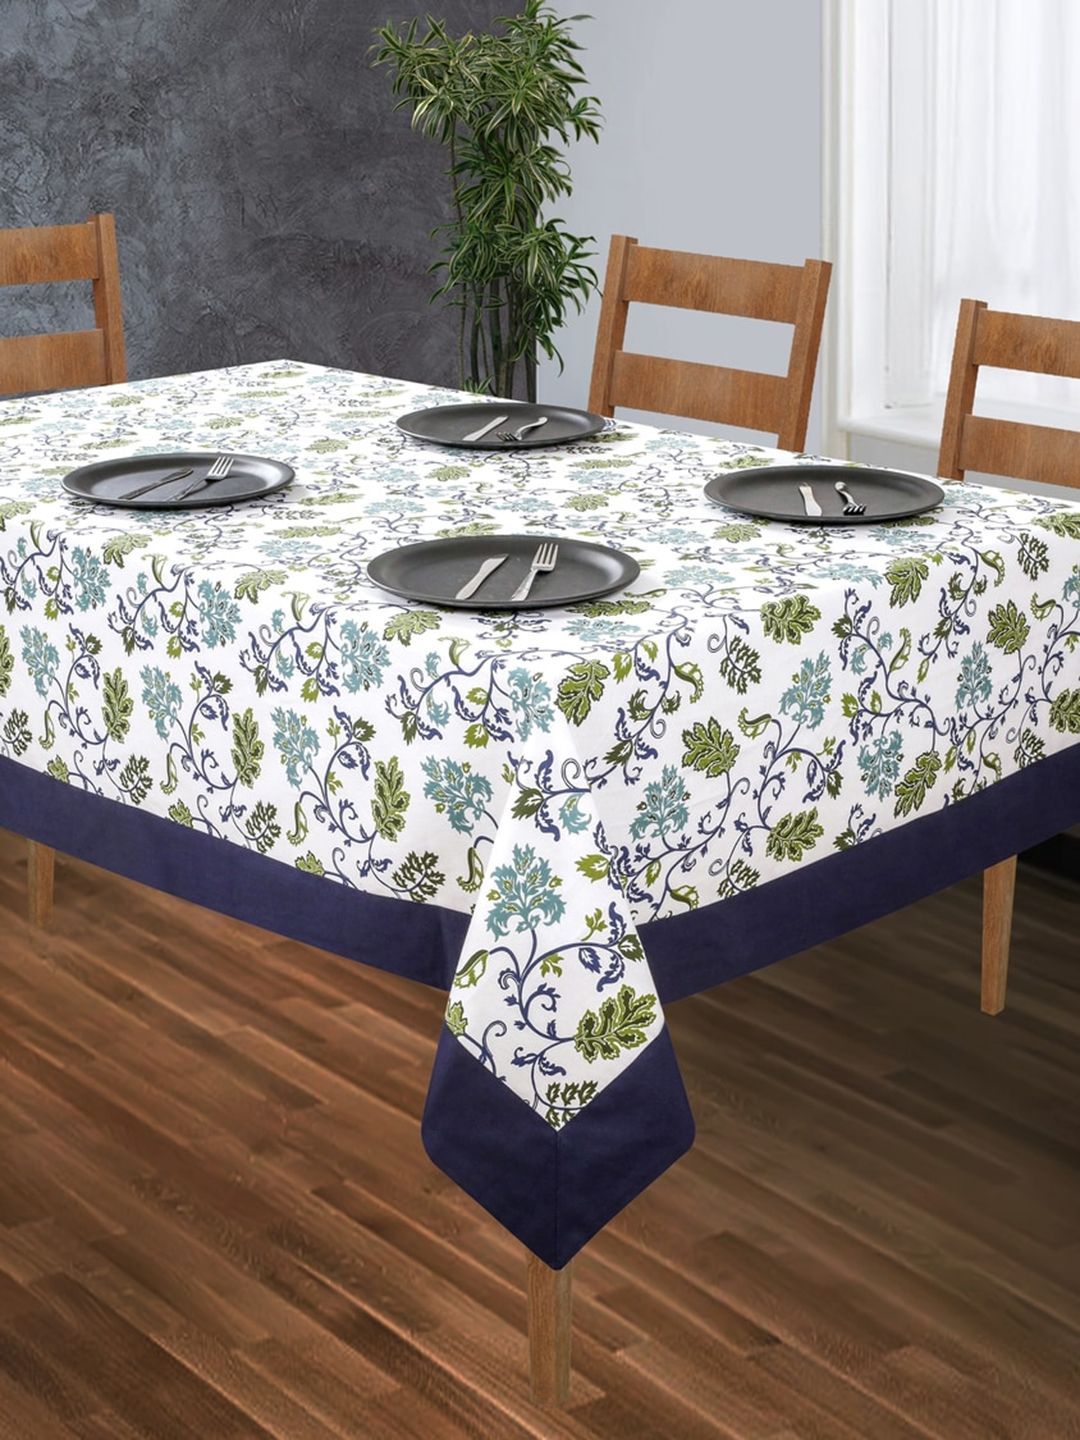 SHADES of LIFE Blue & White Printed Cotton 4-Seater Table Cover Price in India